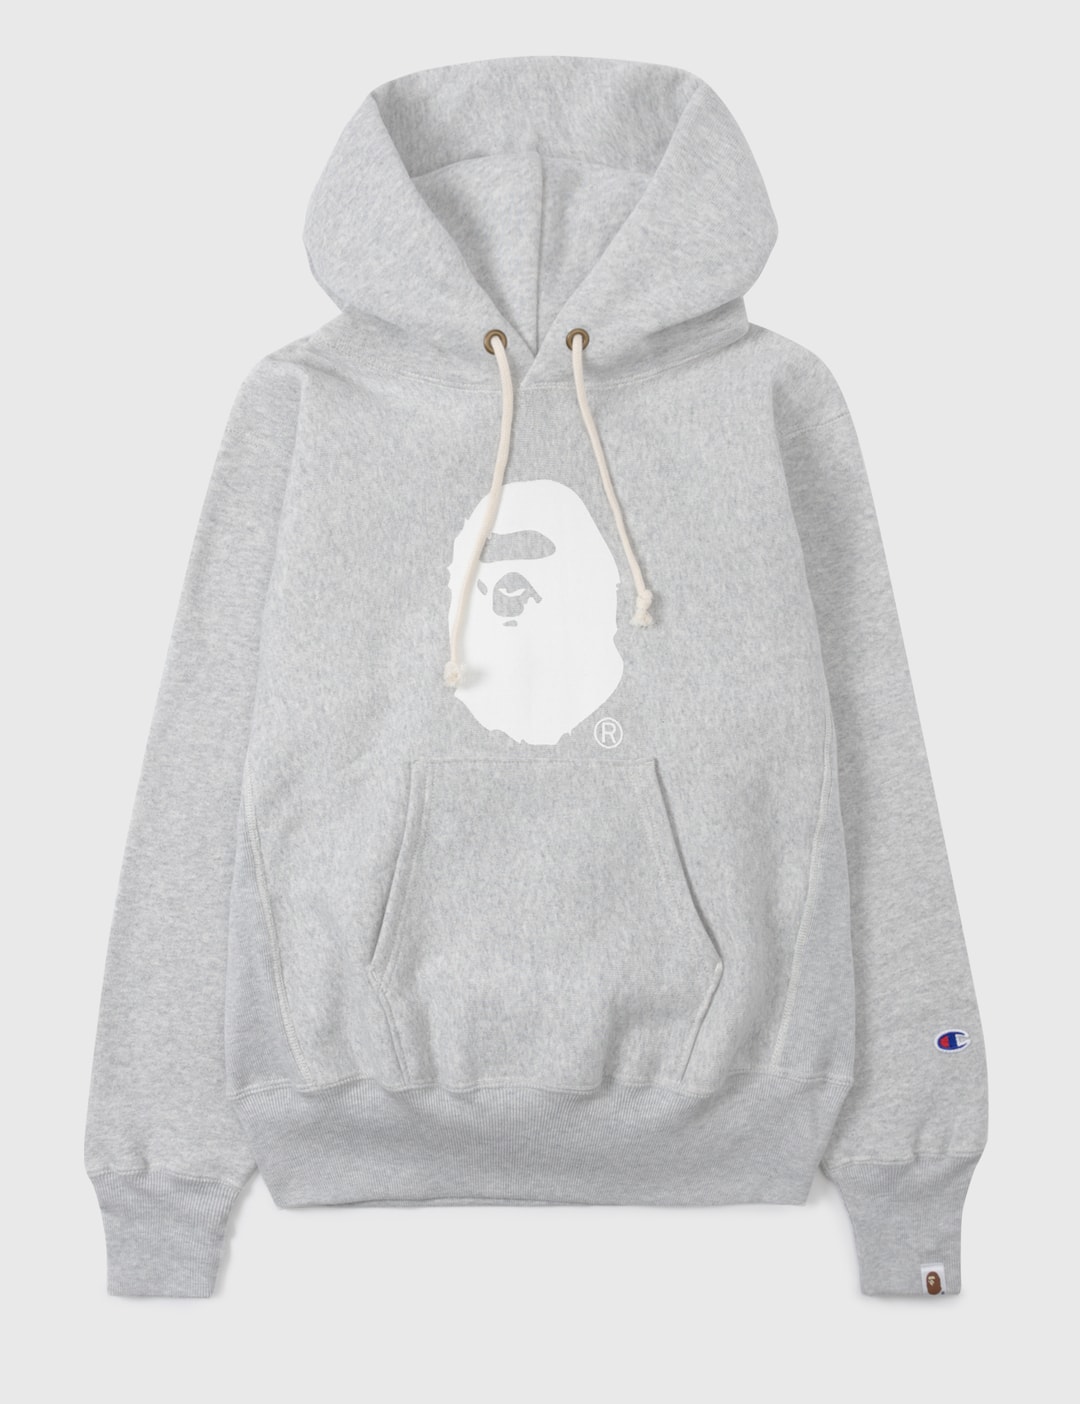 BAPE - Bape X Champion Hoodie | HBX - Globally Curated and Lifestyle by Hypebeast